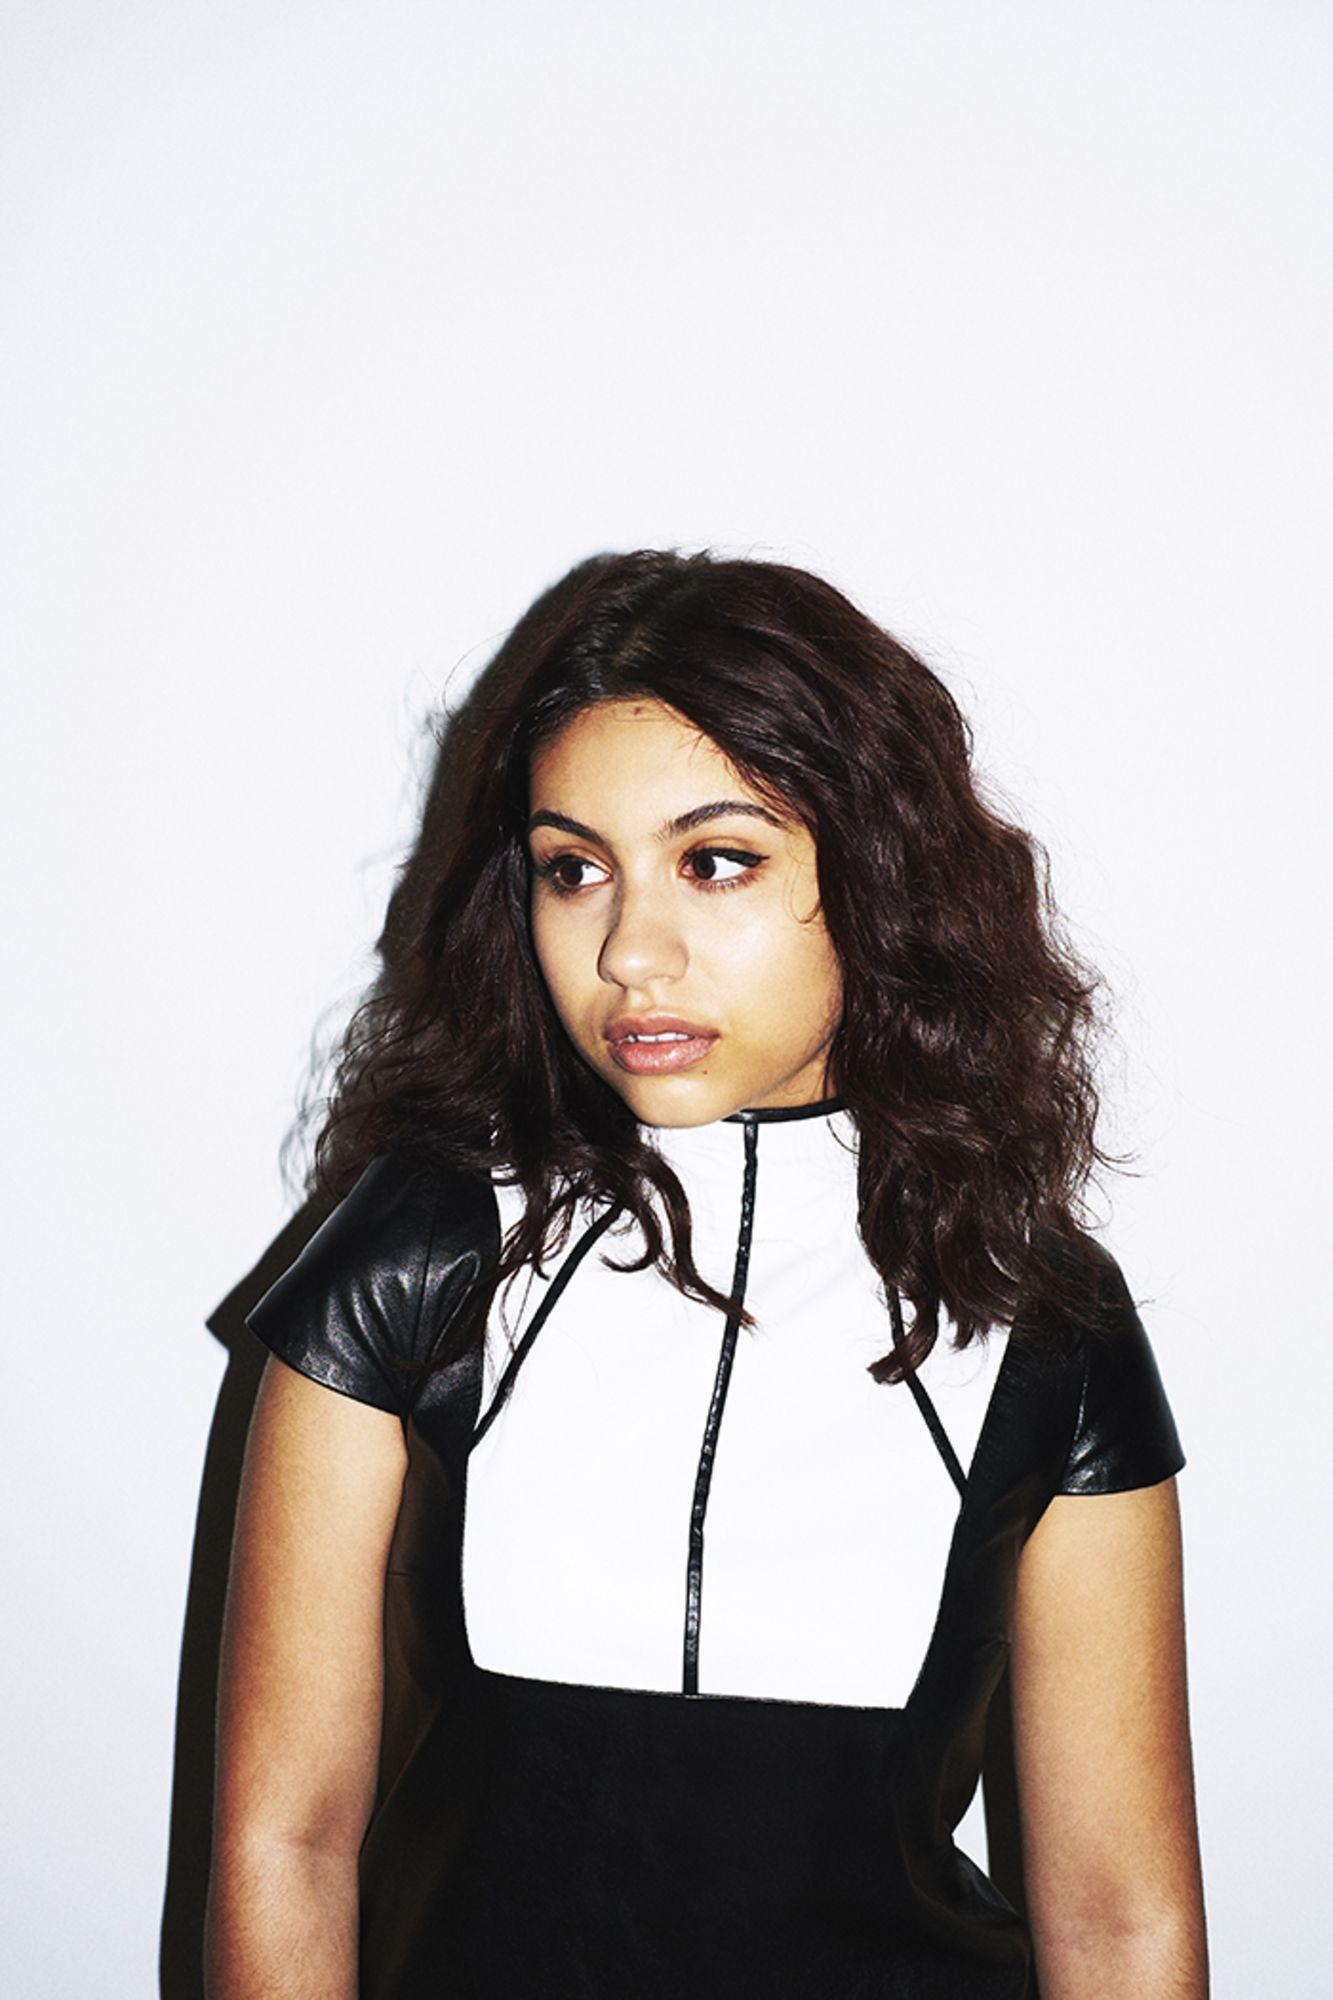 5 Alessia Cara HD Wallpapers | Backgrounds - Wallpaper Abyss